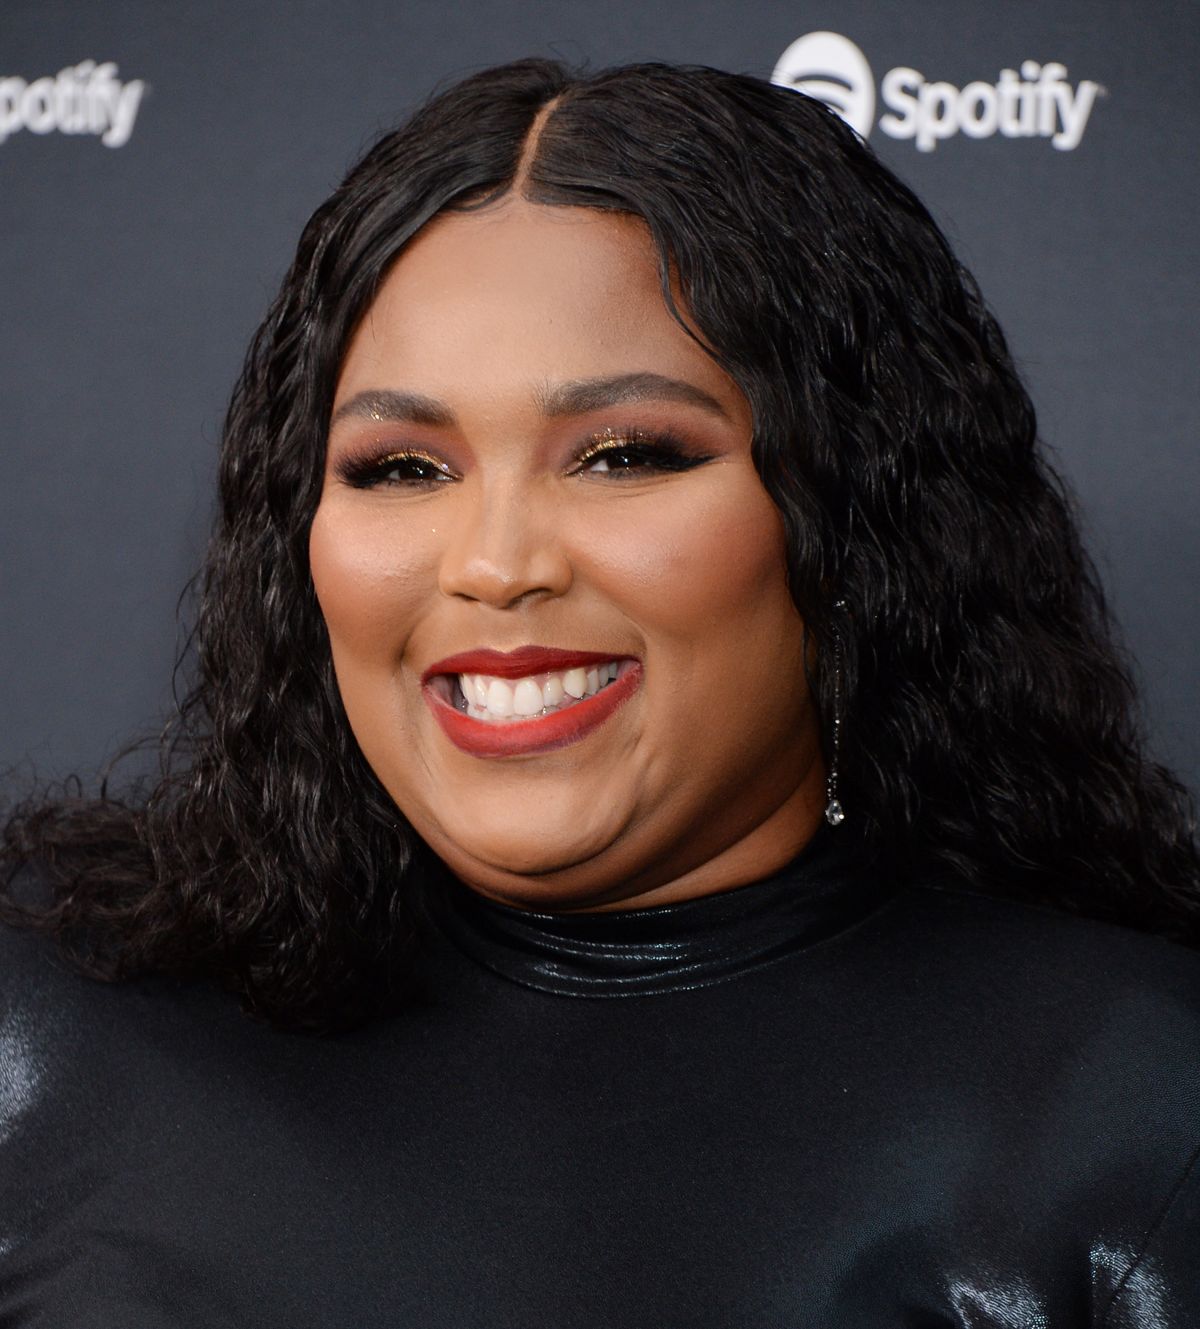 LIZZO at Spotify Hosts Best New Artist Party in Los Angeles 01/23/2020 ...